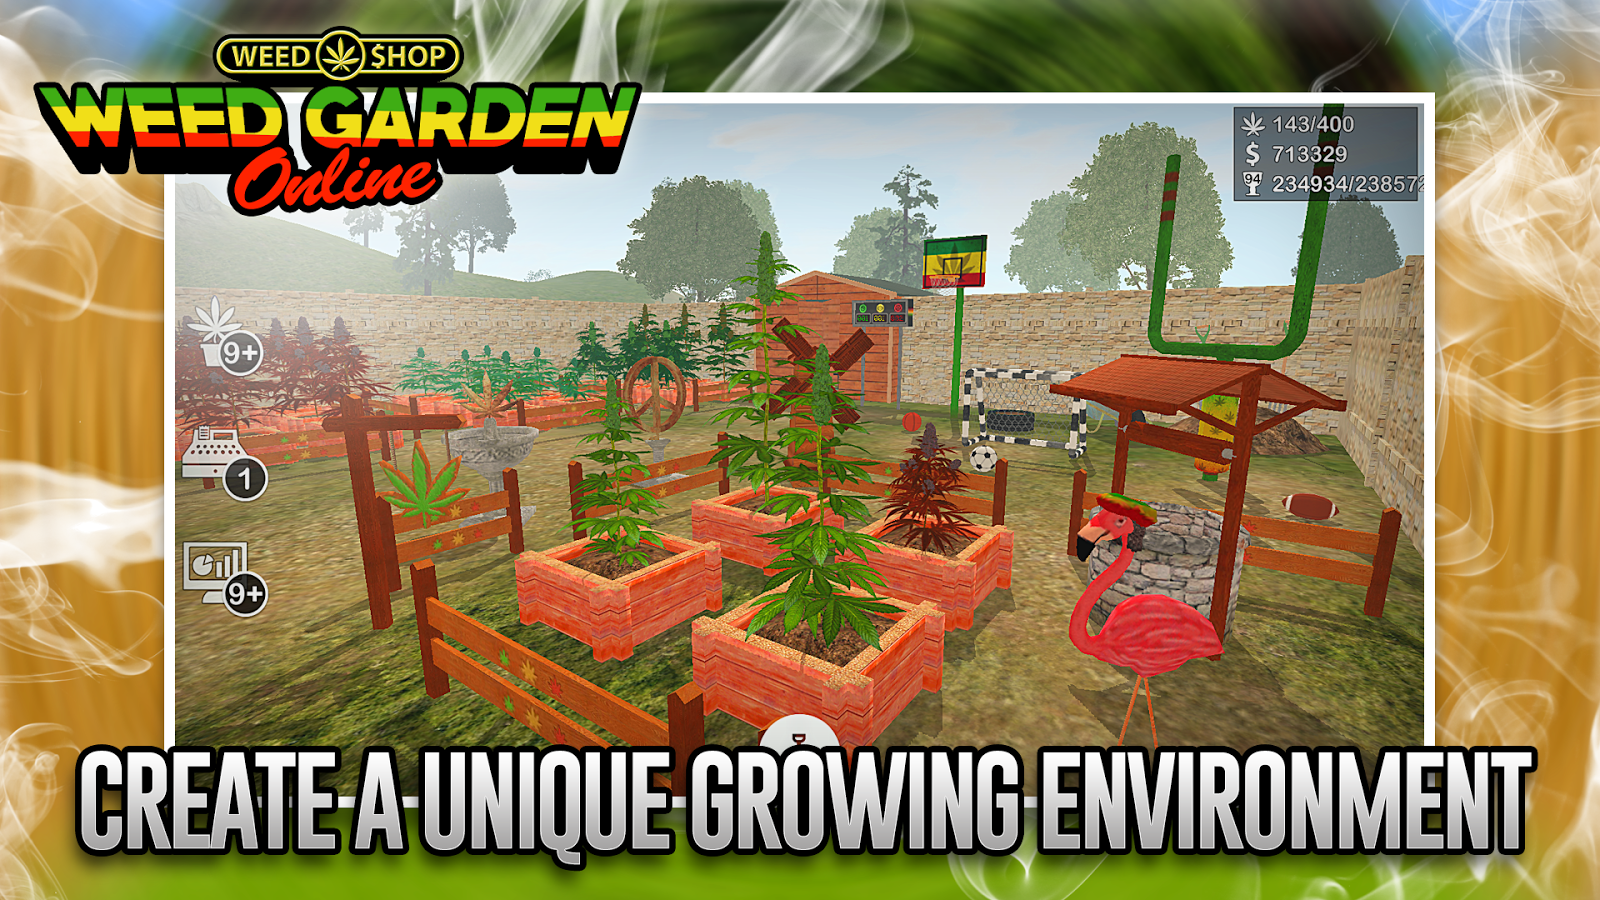 Weed Garden The Game